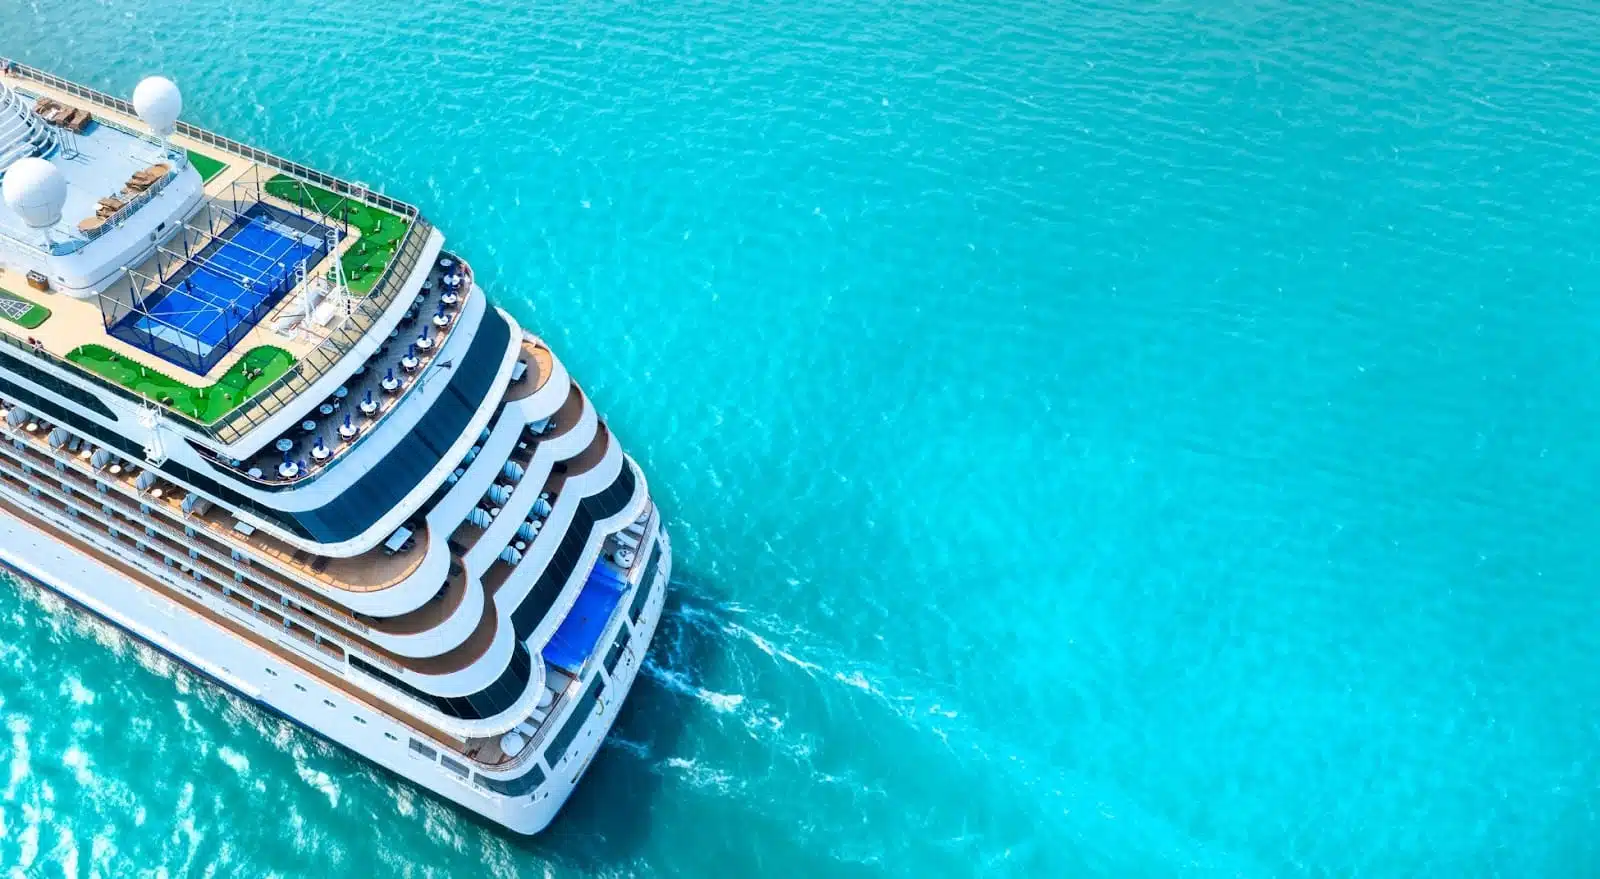 Stern of cruise ship sailing over turquoise blue water